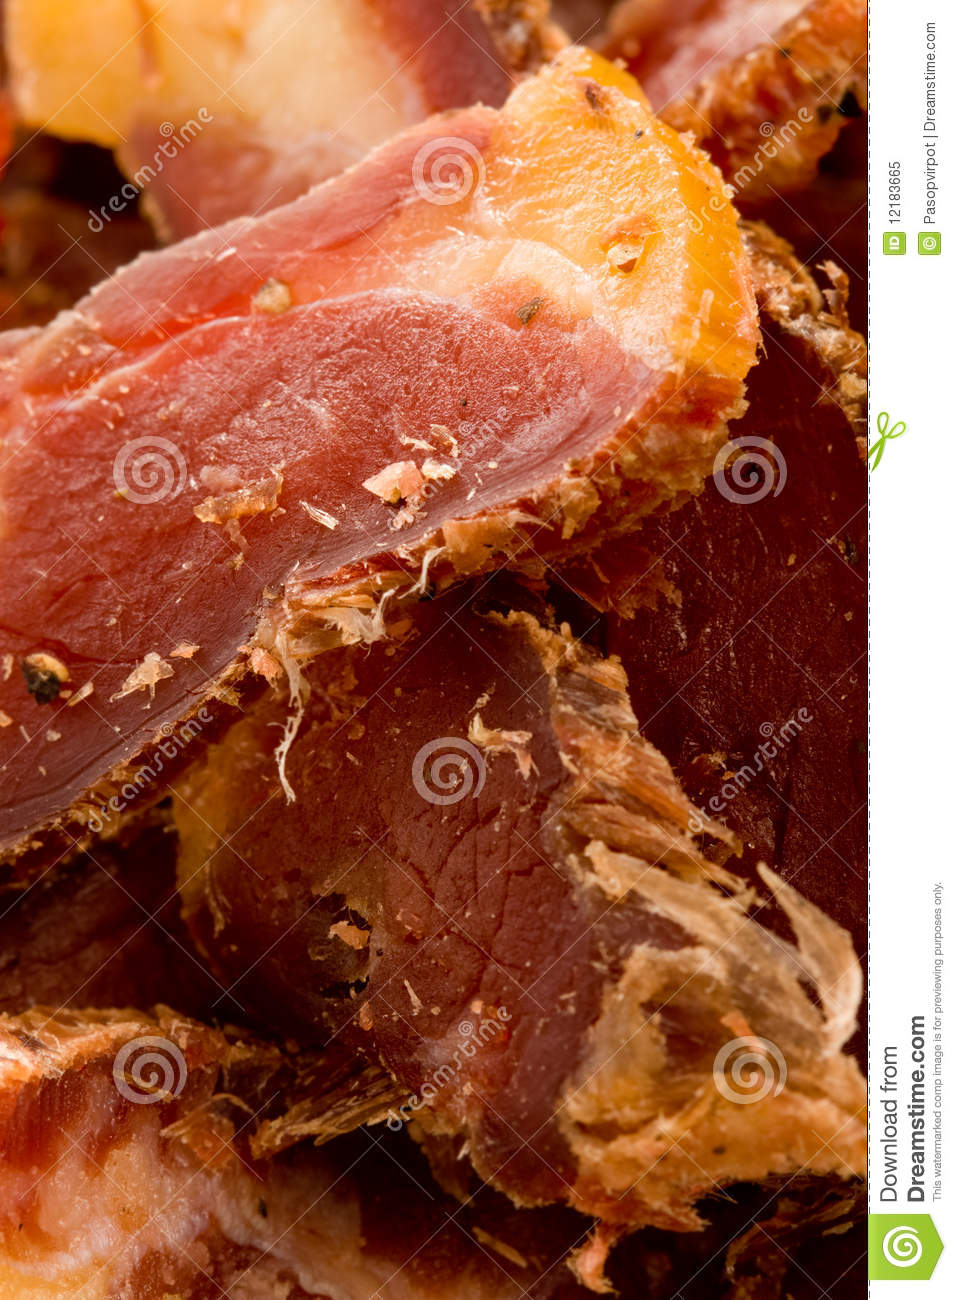 Biltong South African Dried Meat Snack Royalty Free Stock Photo